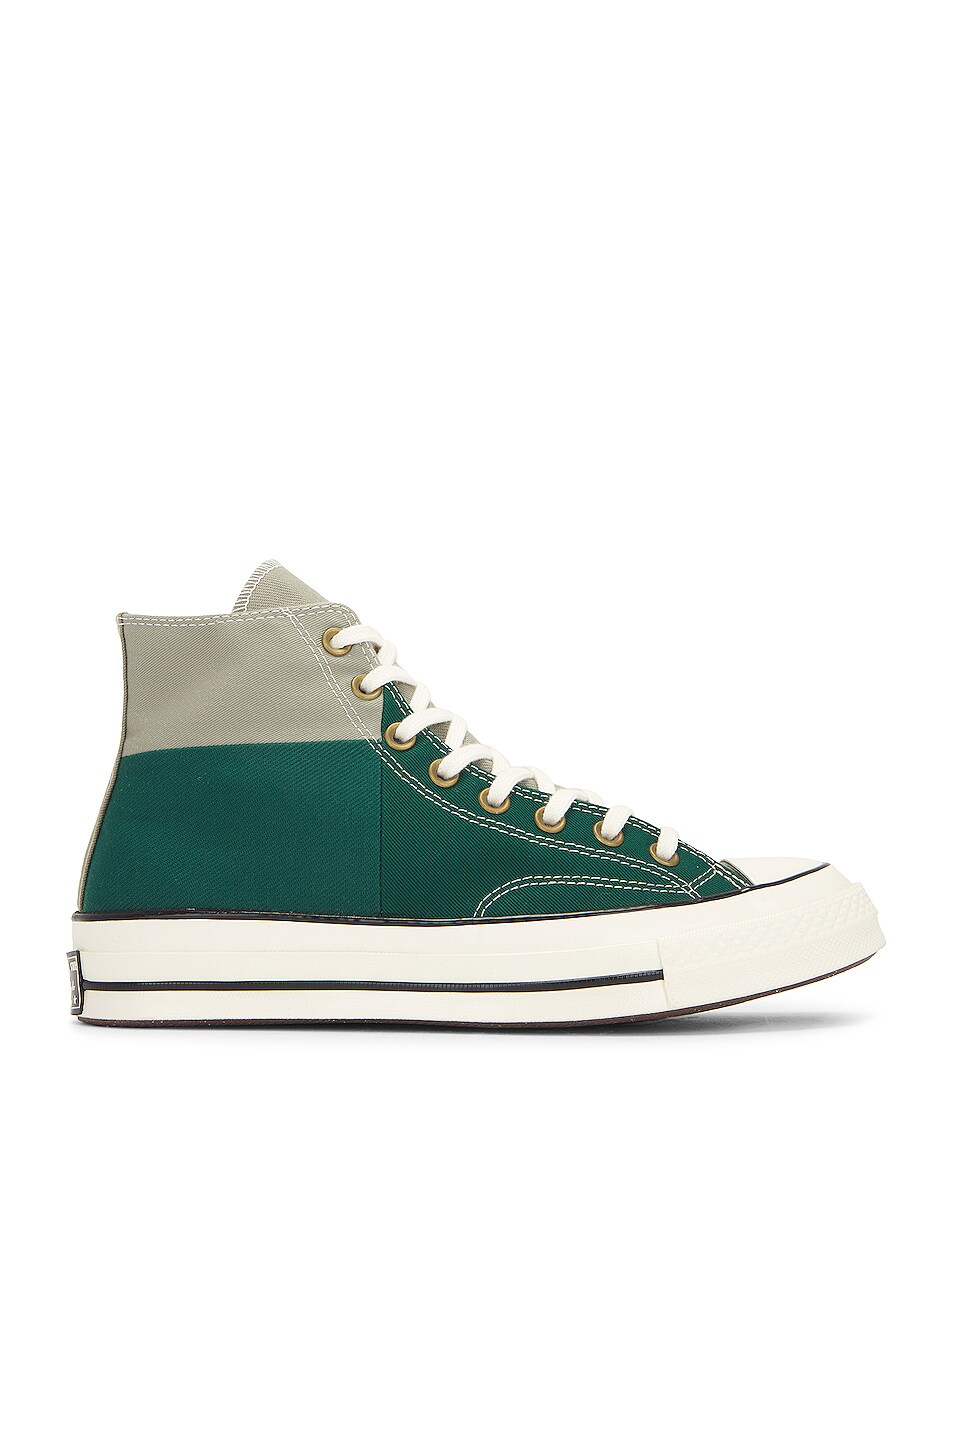 Image 1 of Converse Chuck 70 Colorblocked in Light Field Surplus, Midnight Clover, & Egret